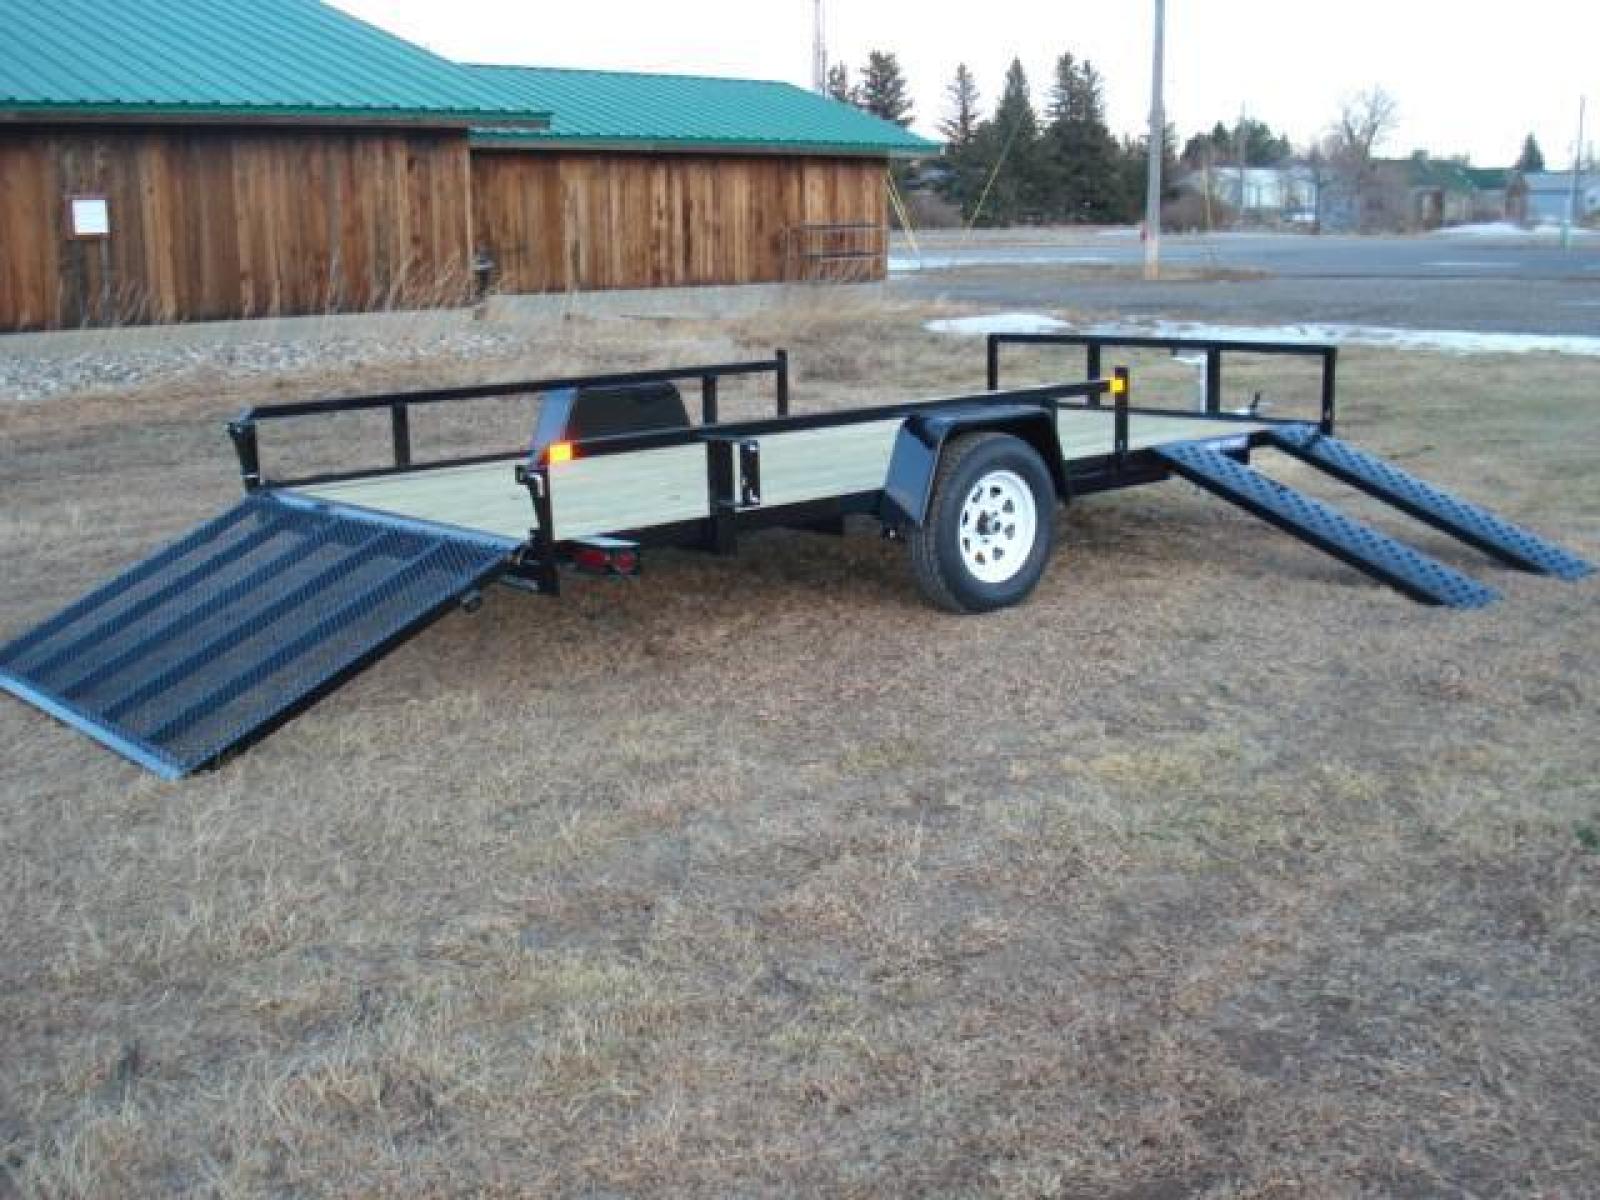 2023 Black SureTrac 7 x 14 ATV , located at 310 West 1st Ave, Big Timber, MT, 59011, (406) 860-8510, 45.833511, -109.957809 - SURE-TRAC 7 X 14 TUBE TOP ATV, 3K GVW, SIDE RAMPS, SPRING ASSISTED REAR RAMP, 15" RADIAL TIRES, TREATED WOOD DECK, LED LIGHTS, WIRING RUN IN CONDUIT, POWDER COAT FINISH, SPARE TIRE MOUNT. SURE-TRAC QUALITY FIT AND FINISH. OPTIONAL SPARE TIRE - $165.00. THE BEST TRAILERS AT THE BEST PRICE!!! Traile - Photo #6